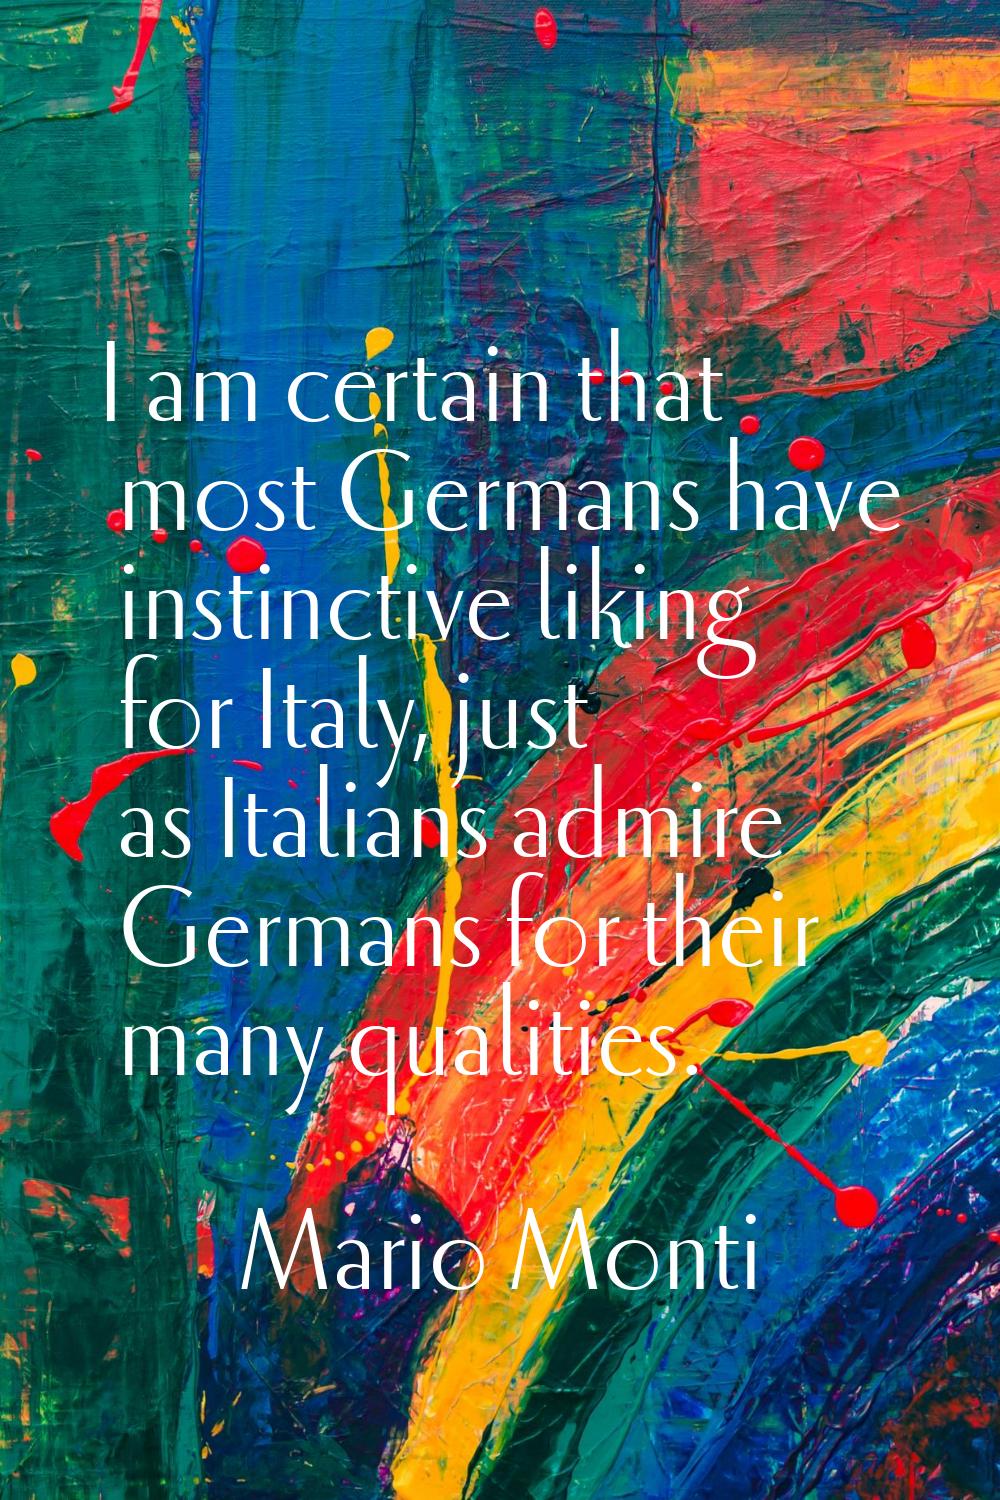 I am certain that most Germans have instinctive liking for Italy, just as Italians admire Germans f